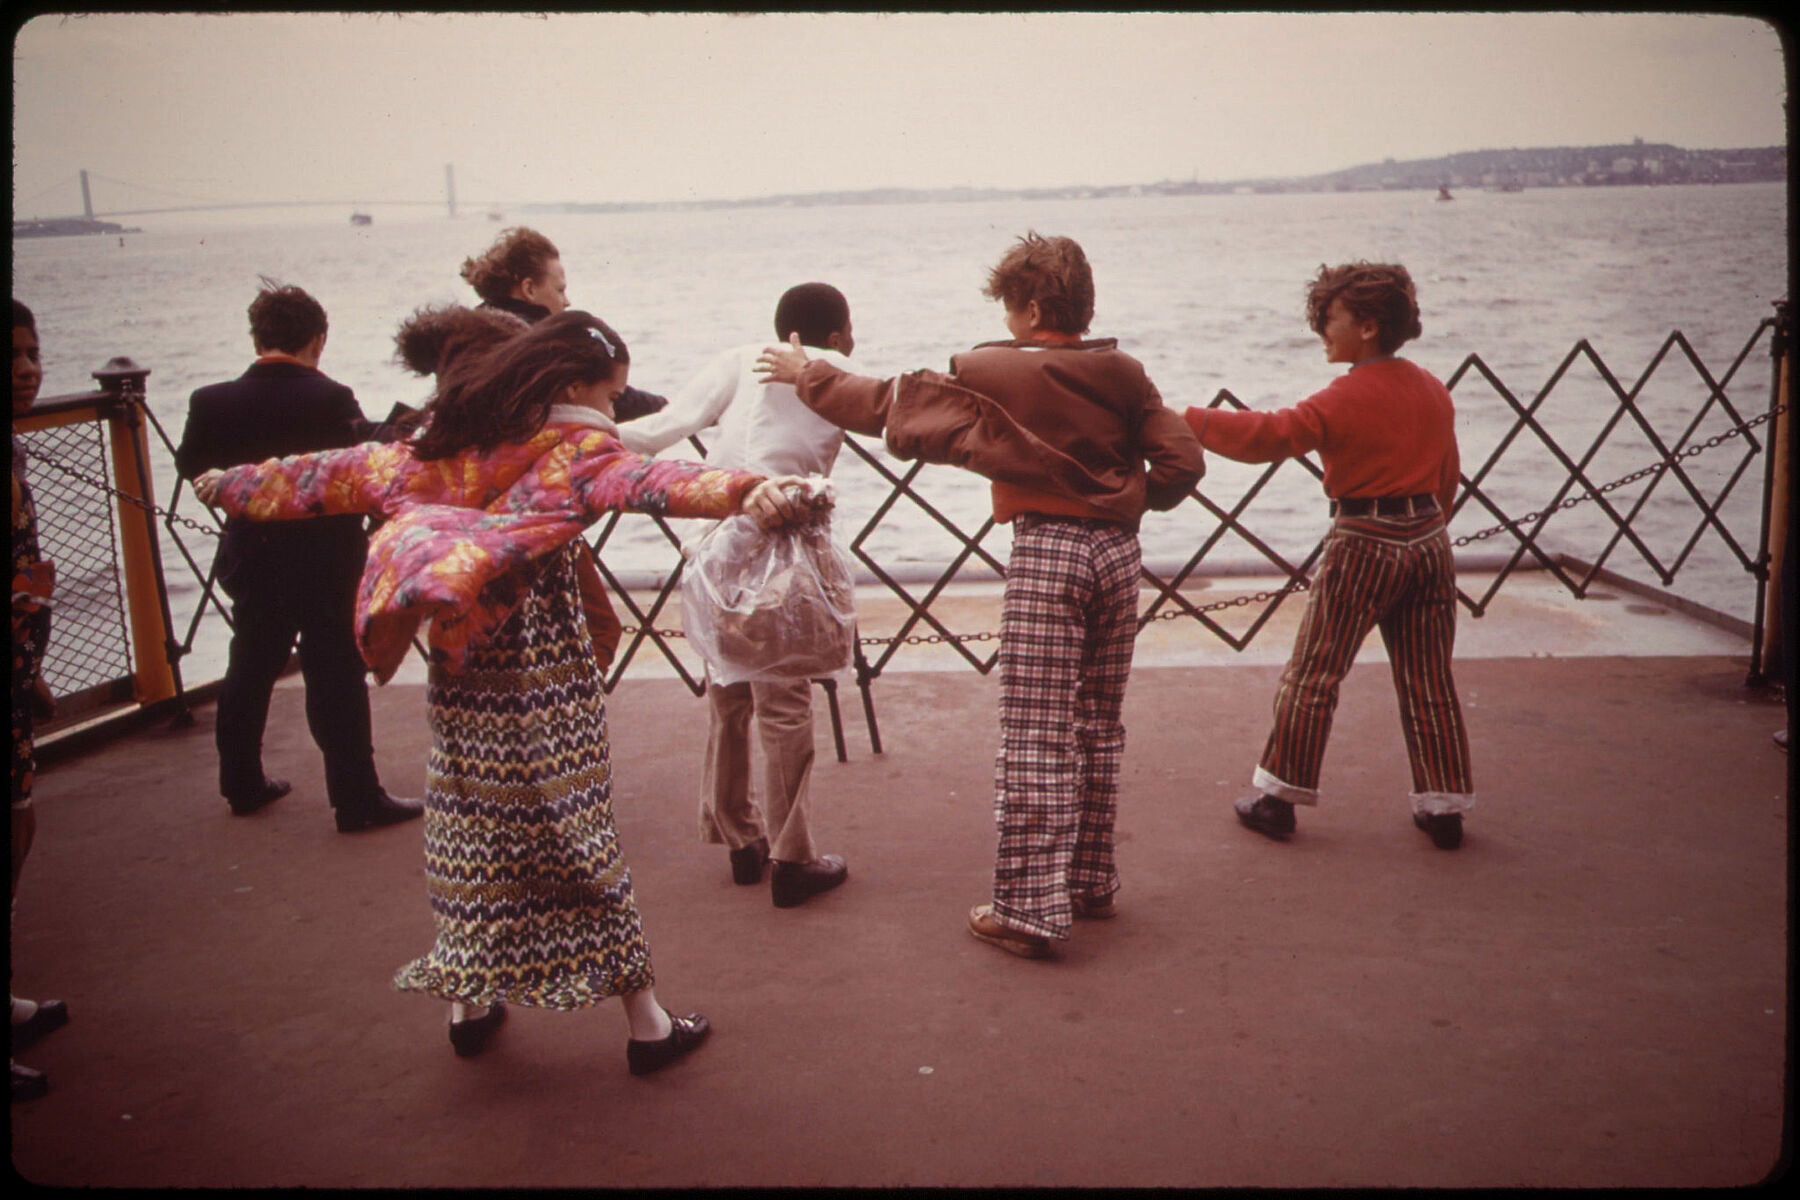 School Excursion on the Staten Island Ferry, Crossing Upper New York Bay by Arthur Tress - 1973